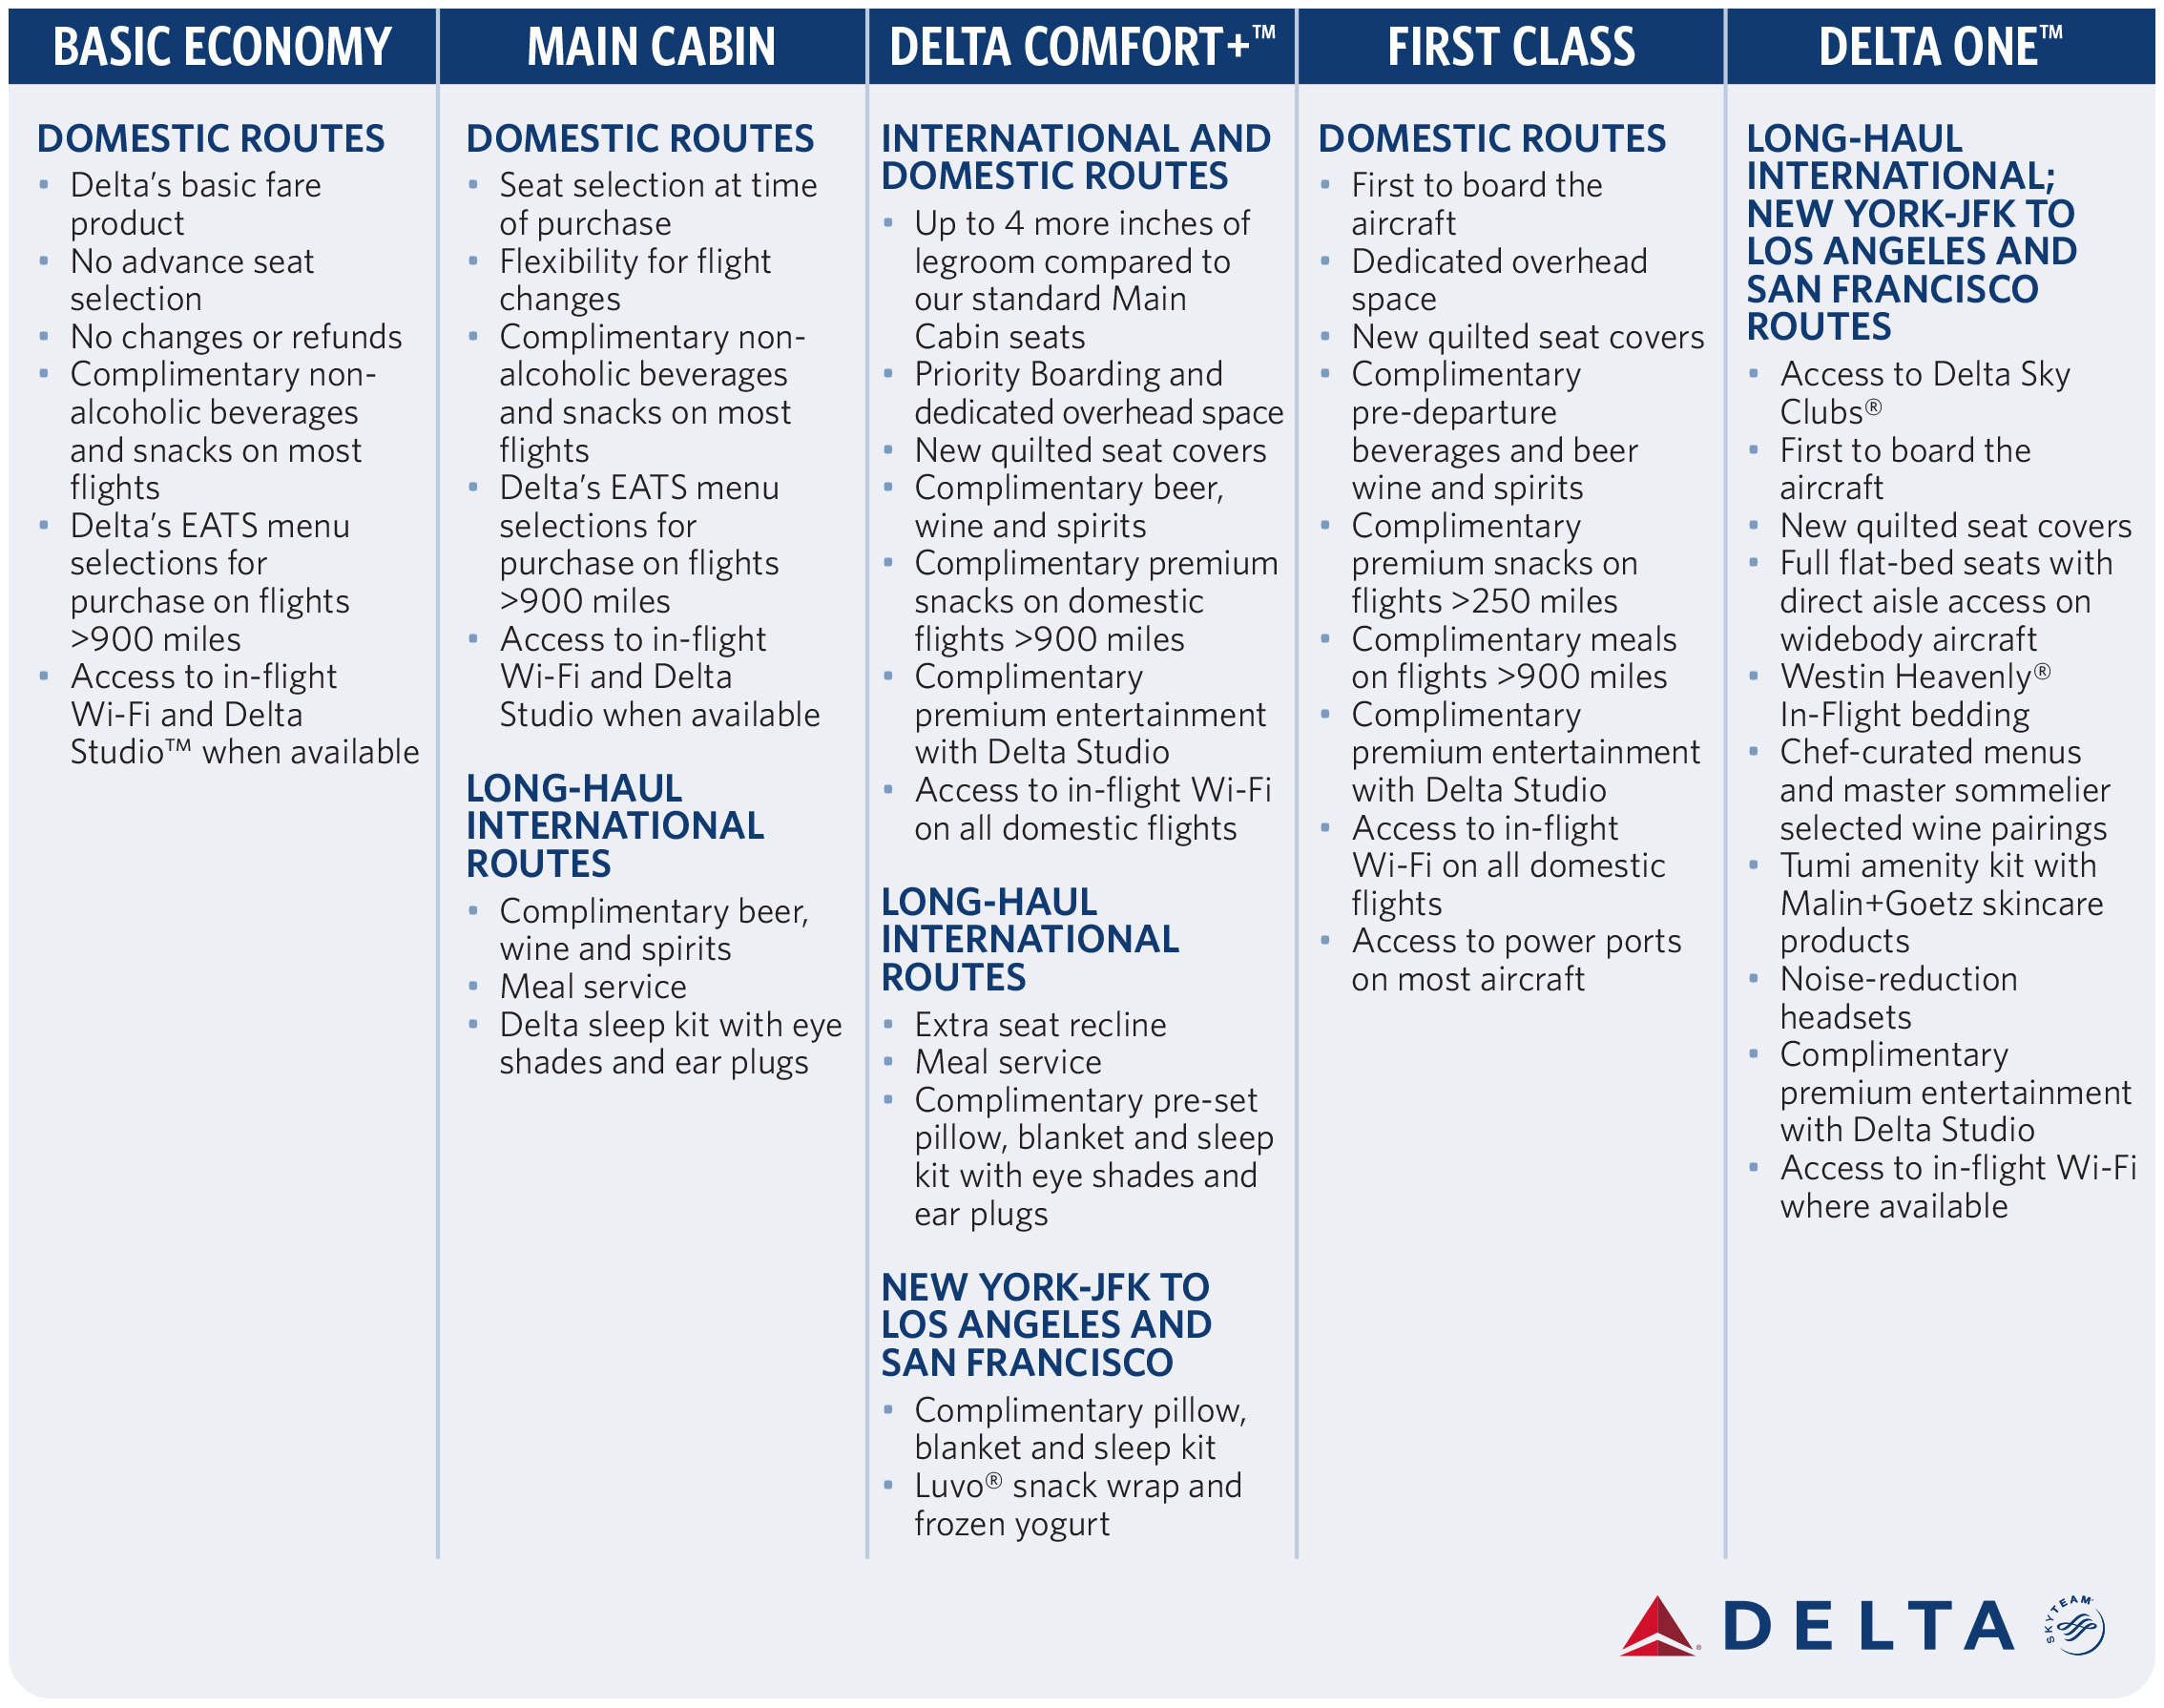 Chart courtesy of Delta Air Lines.